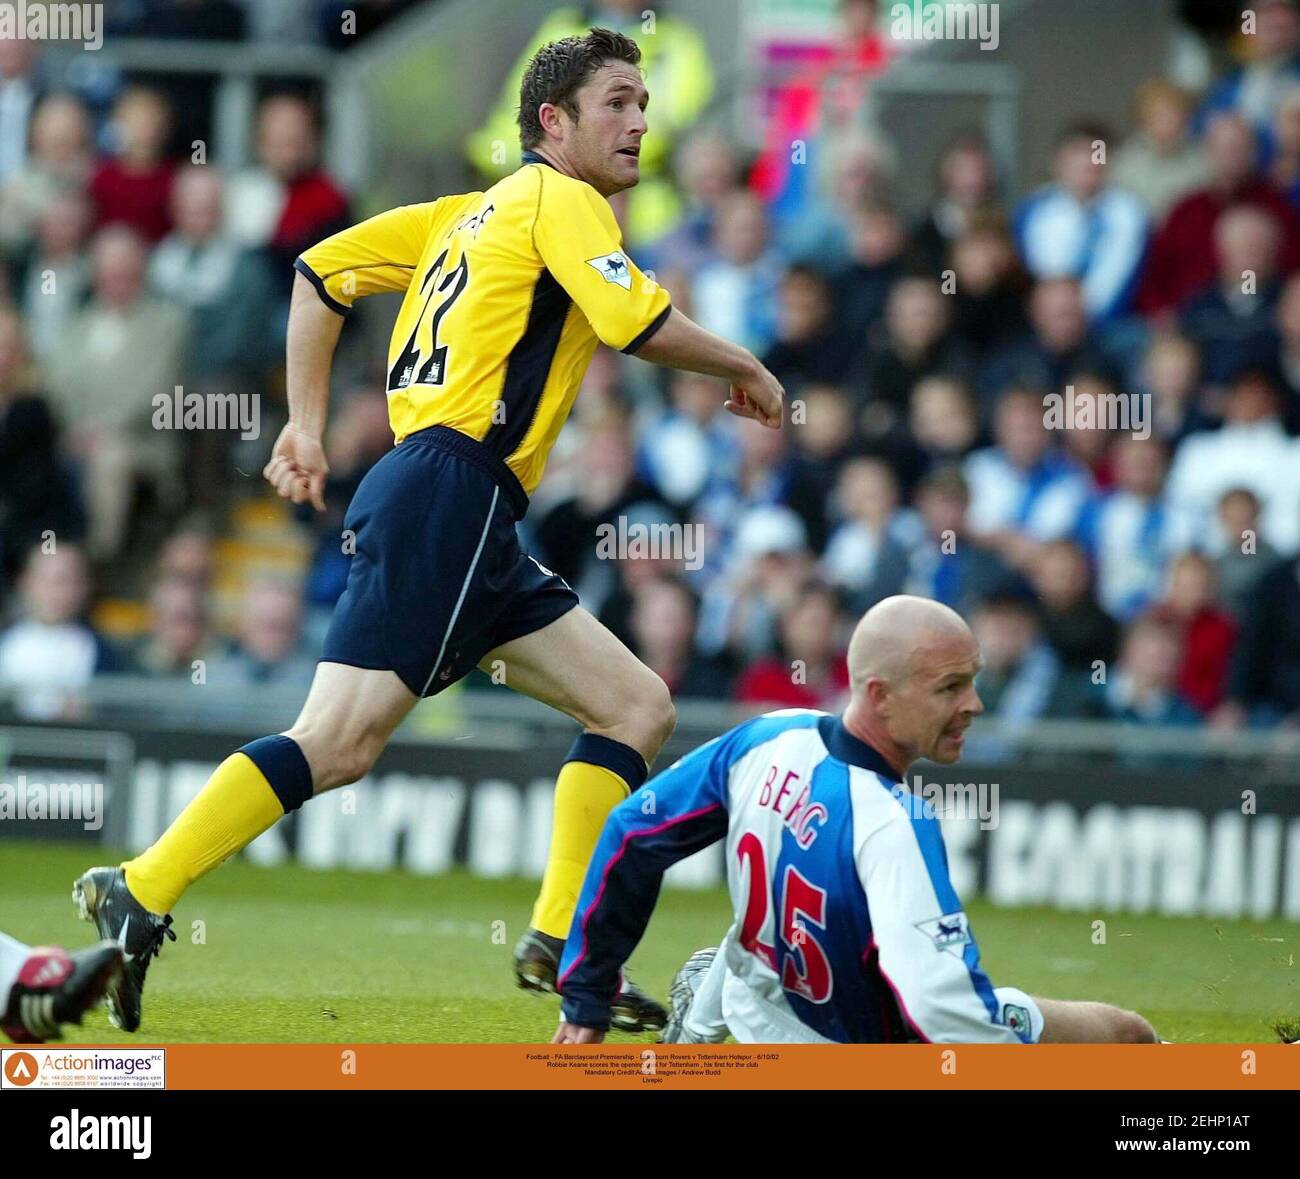 Football - FA Barclaycard Premiership - Blackburn Rovers v Tottenham Hotspur - 6/10/02  Robbie Keane scores the opening goal for Tottenham , his first for the club  Mandatory Credit:Action Images / Andrew Budd  Livepic Stock Photo